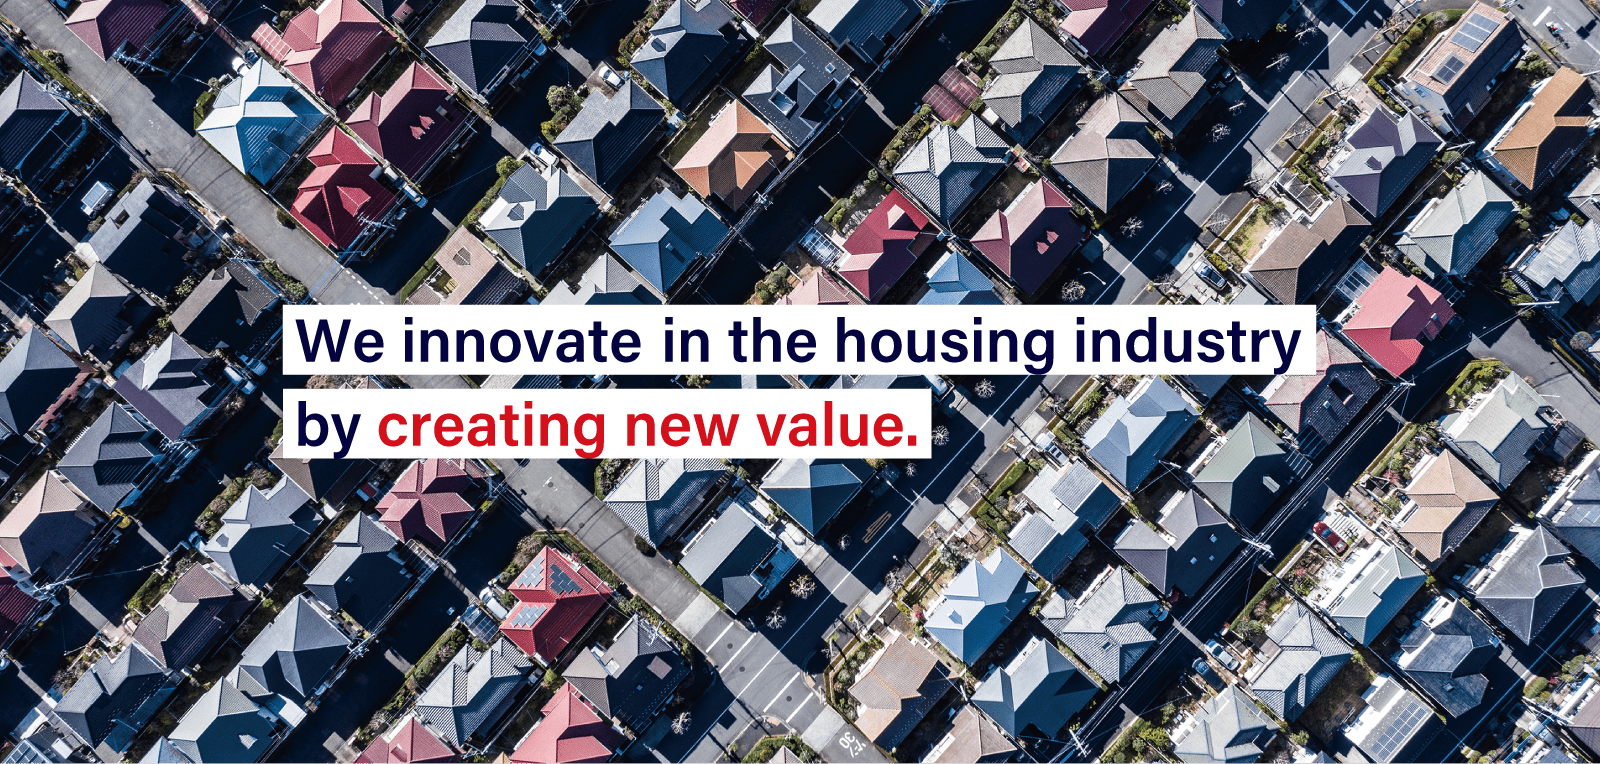 We innovate in the housing industry by creating new value.